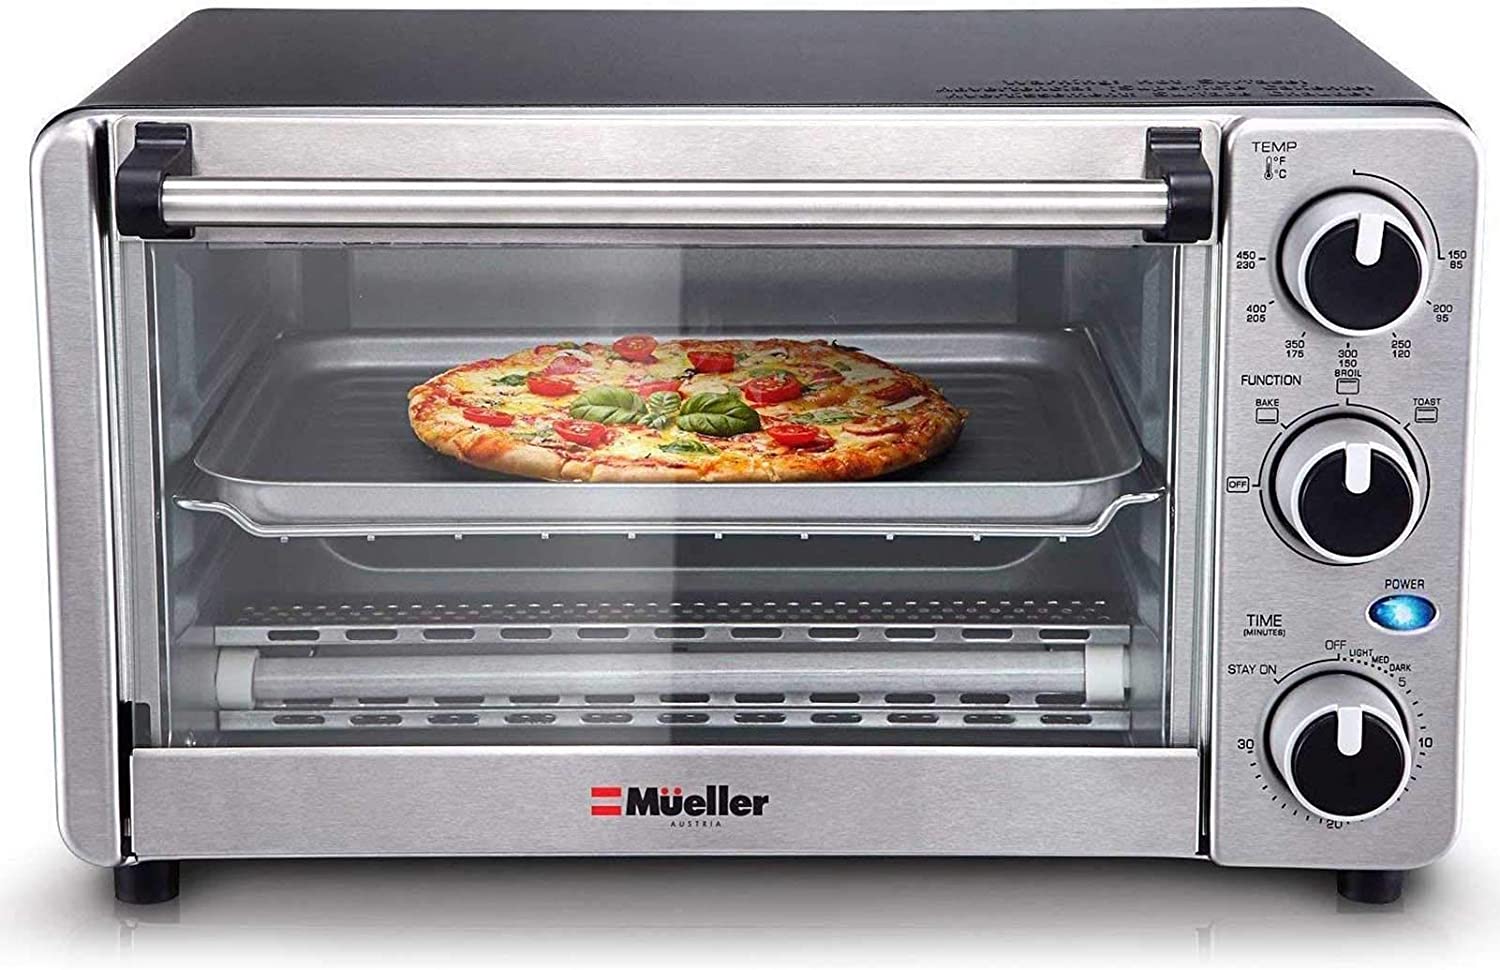 Mueller Austria Toaster Oven 4 Slice, Multi-function Stainless Steel Finish  with Timer - Toast - Bake - Broil Settings, Natural Convection - 1100 Watts  of Power, Includes Baking Pan and Rack